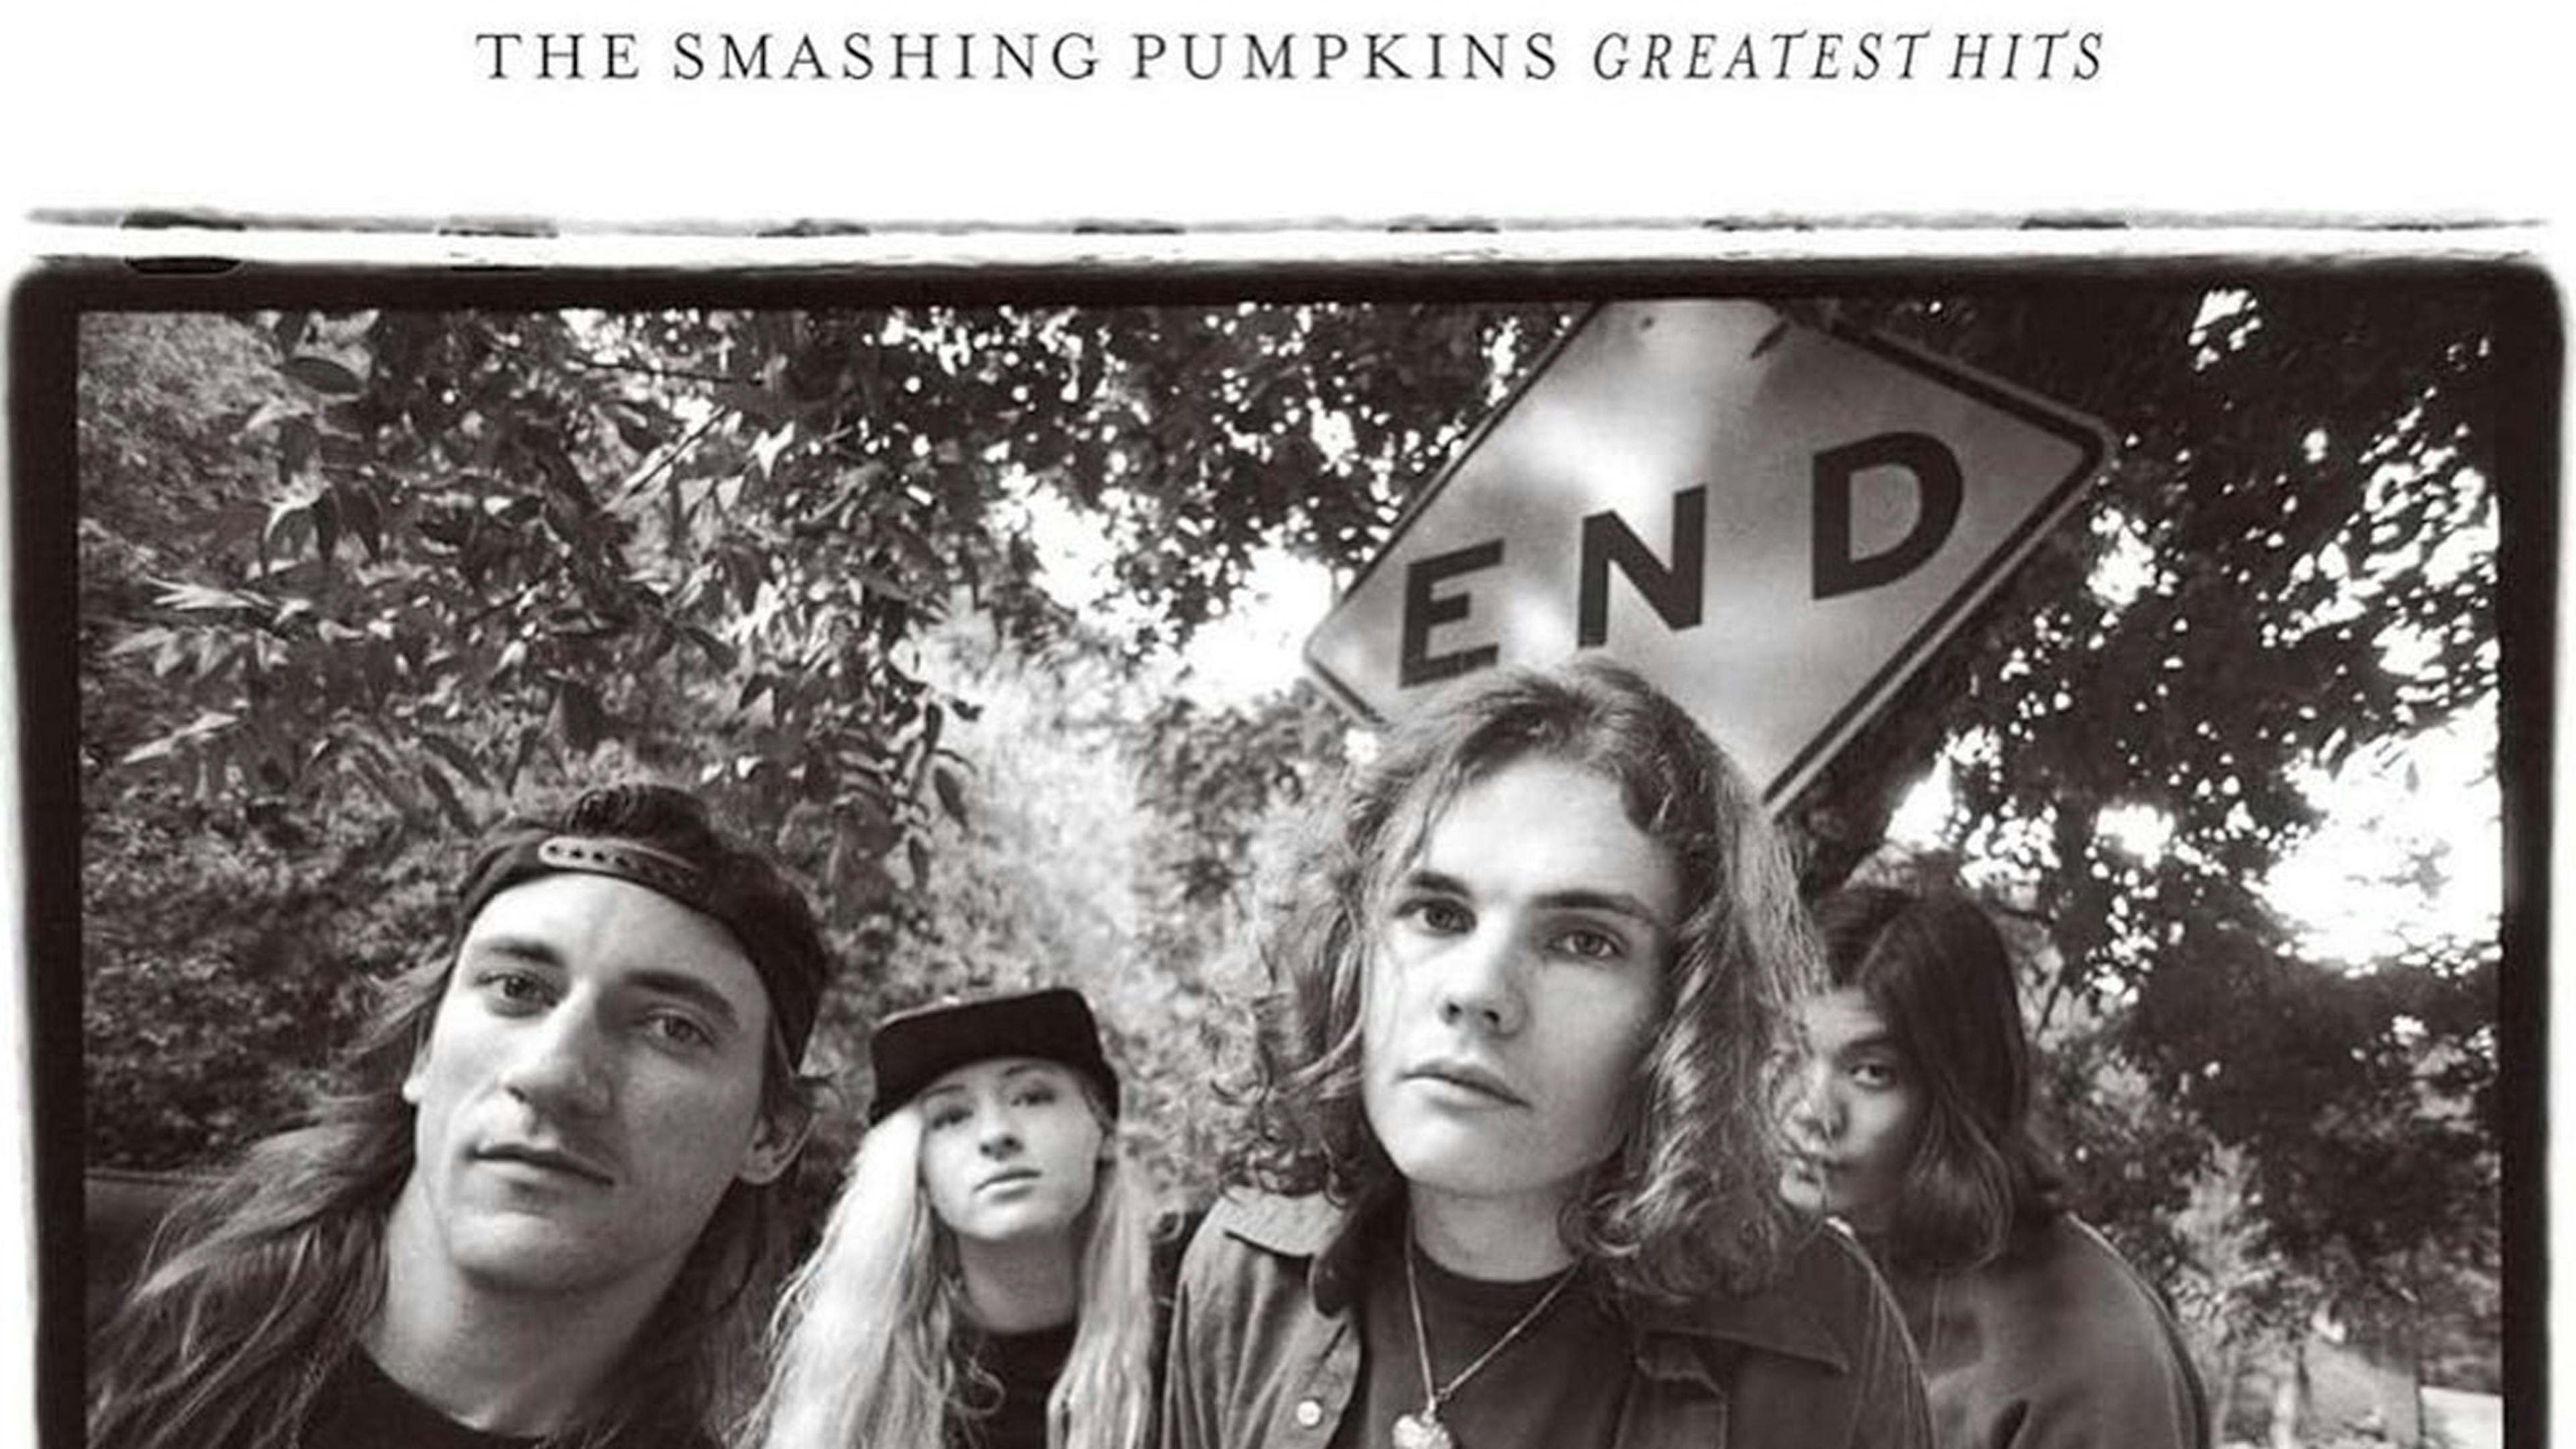 The Smashing Pumpkins announce first-ever vinyl release for their 2001 greatest hits album (Rotten Apples)